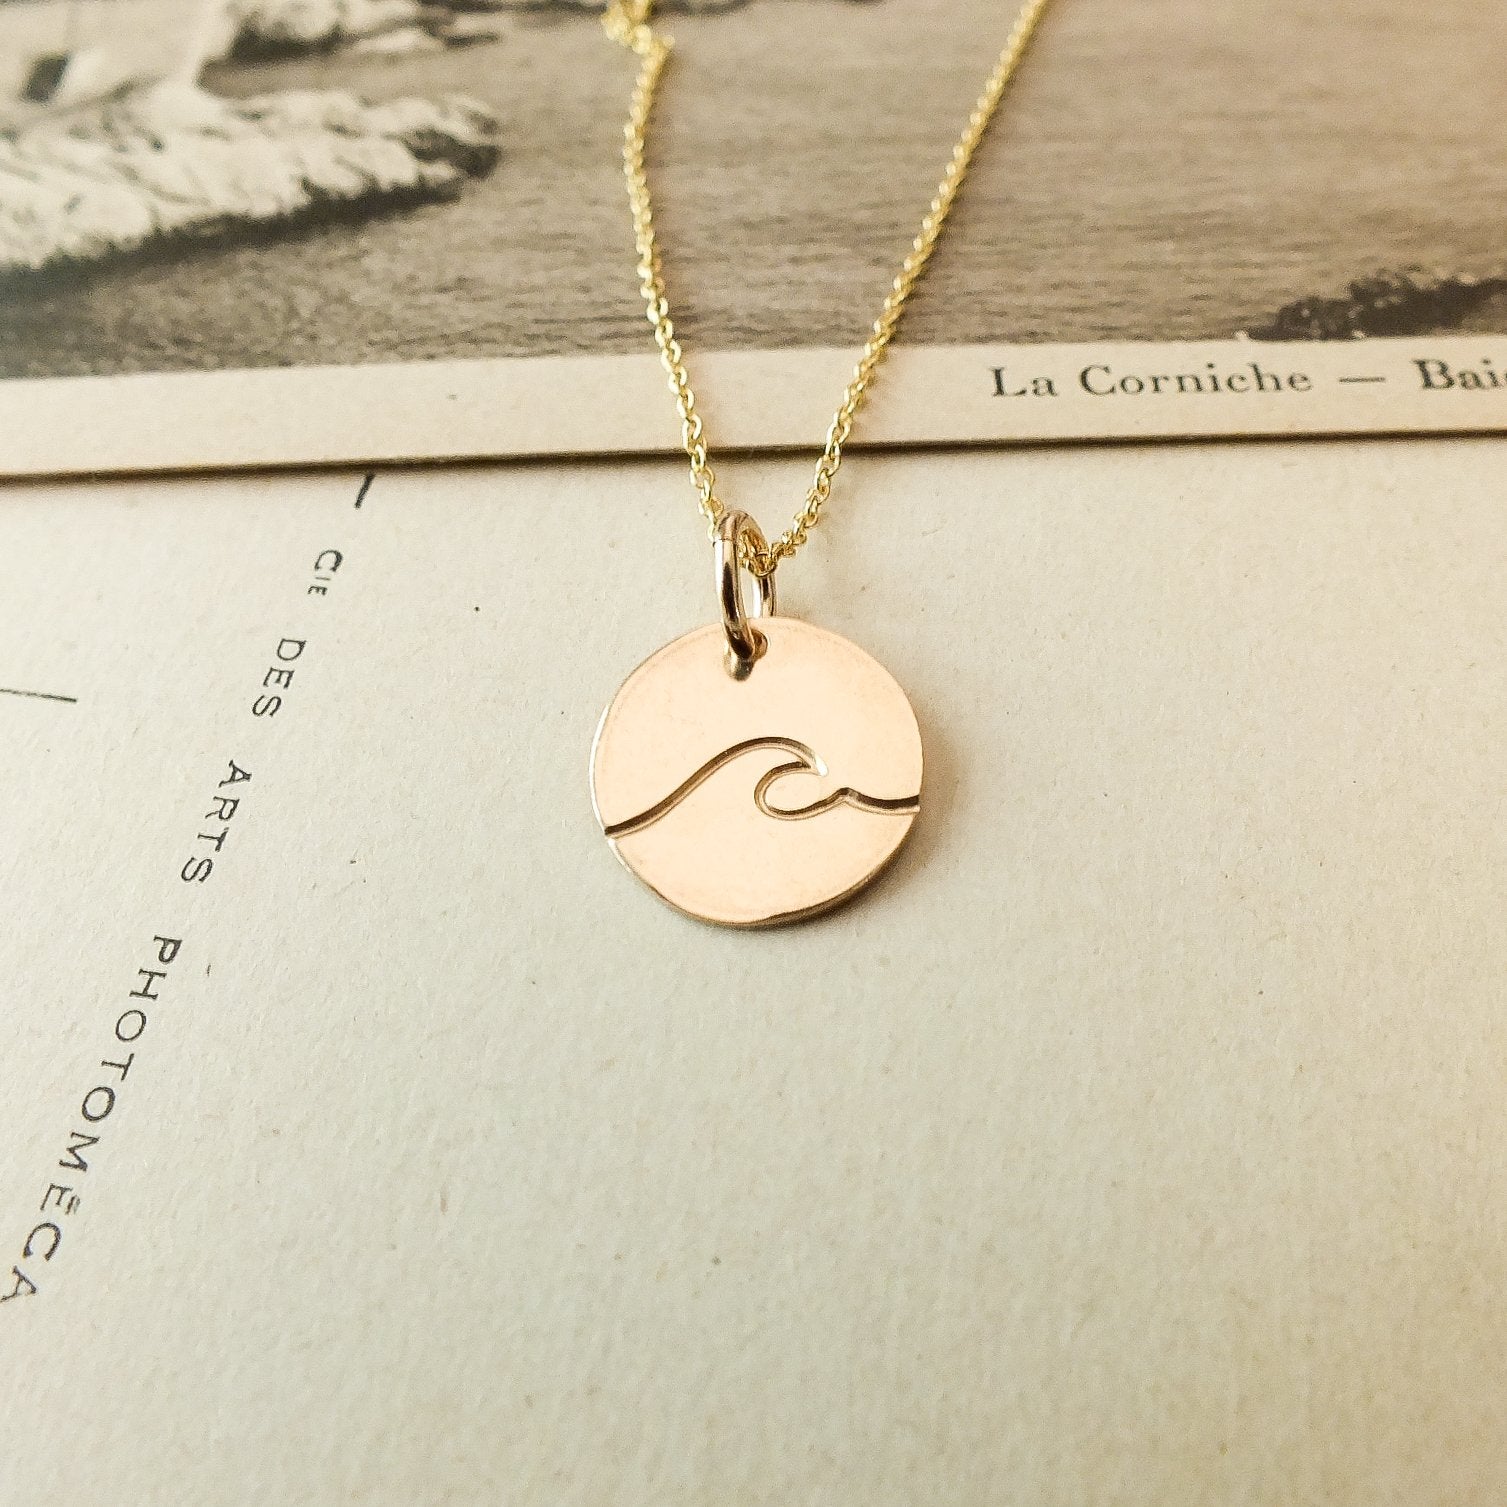 Wave Round Charm Necklace by Becoming Jewelry displayed on a book page.